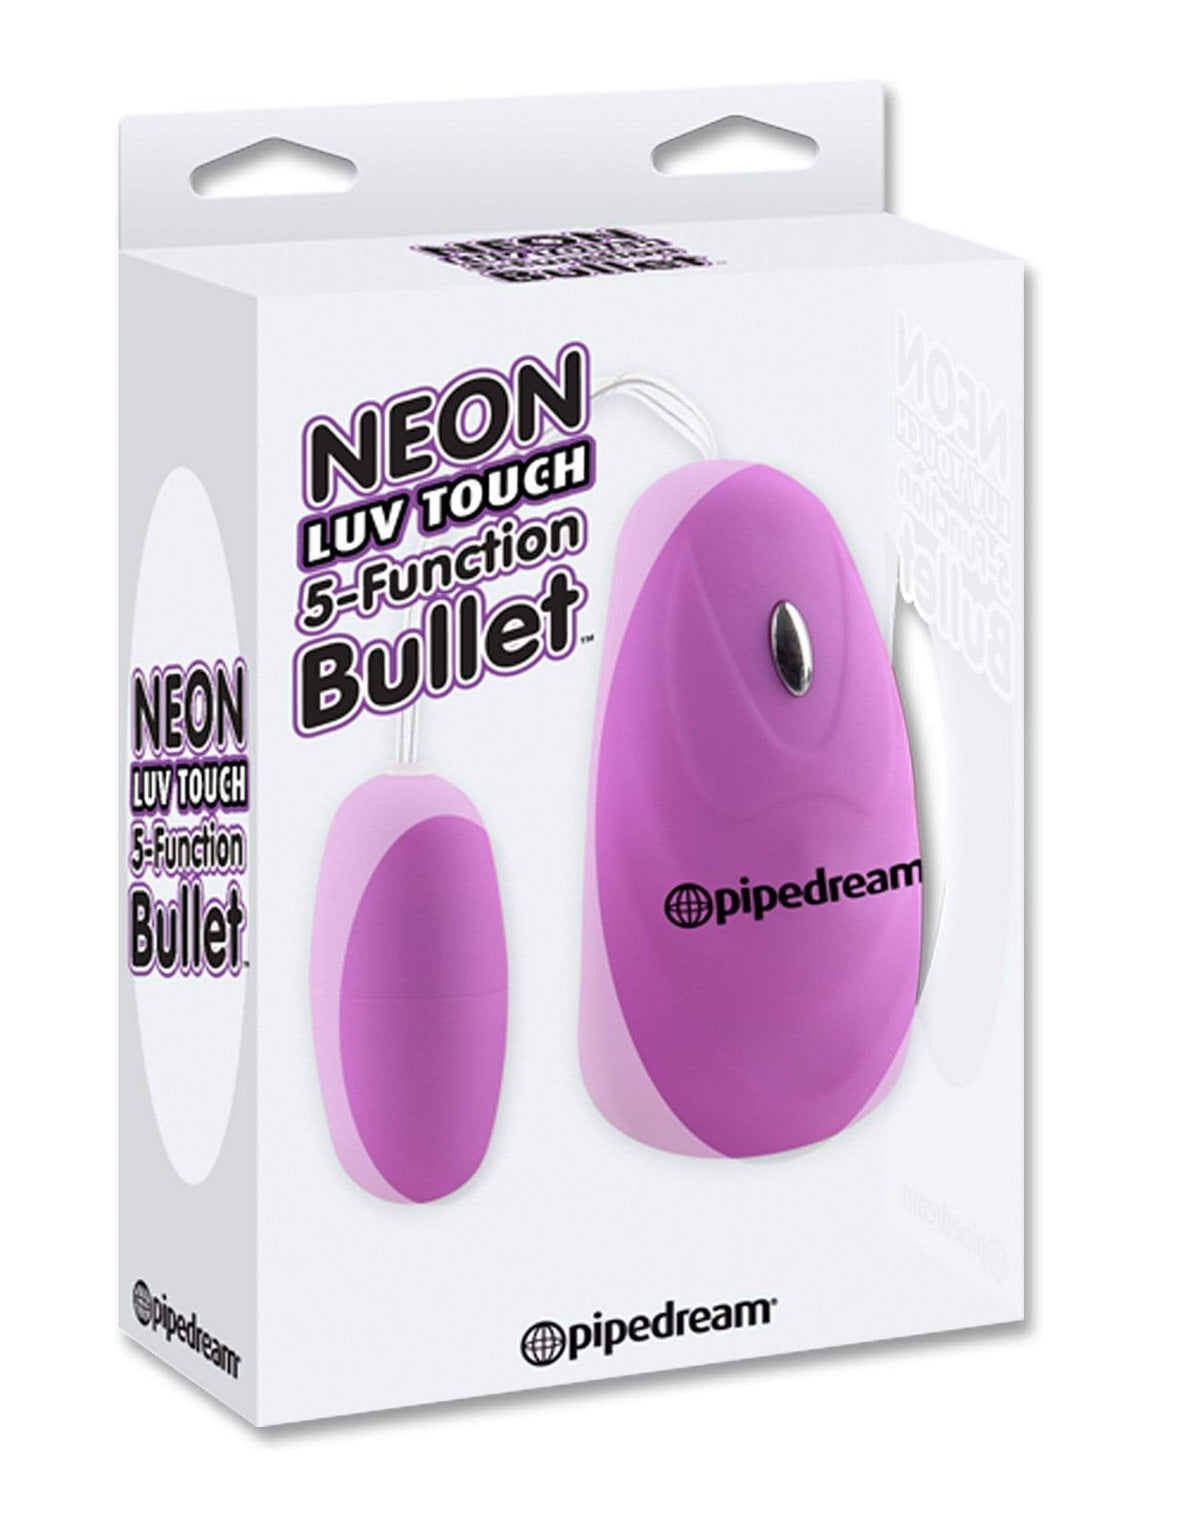 neon luv touch 5 function bullet purple